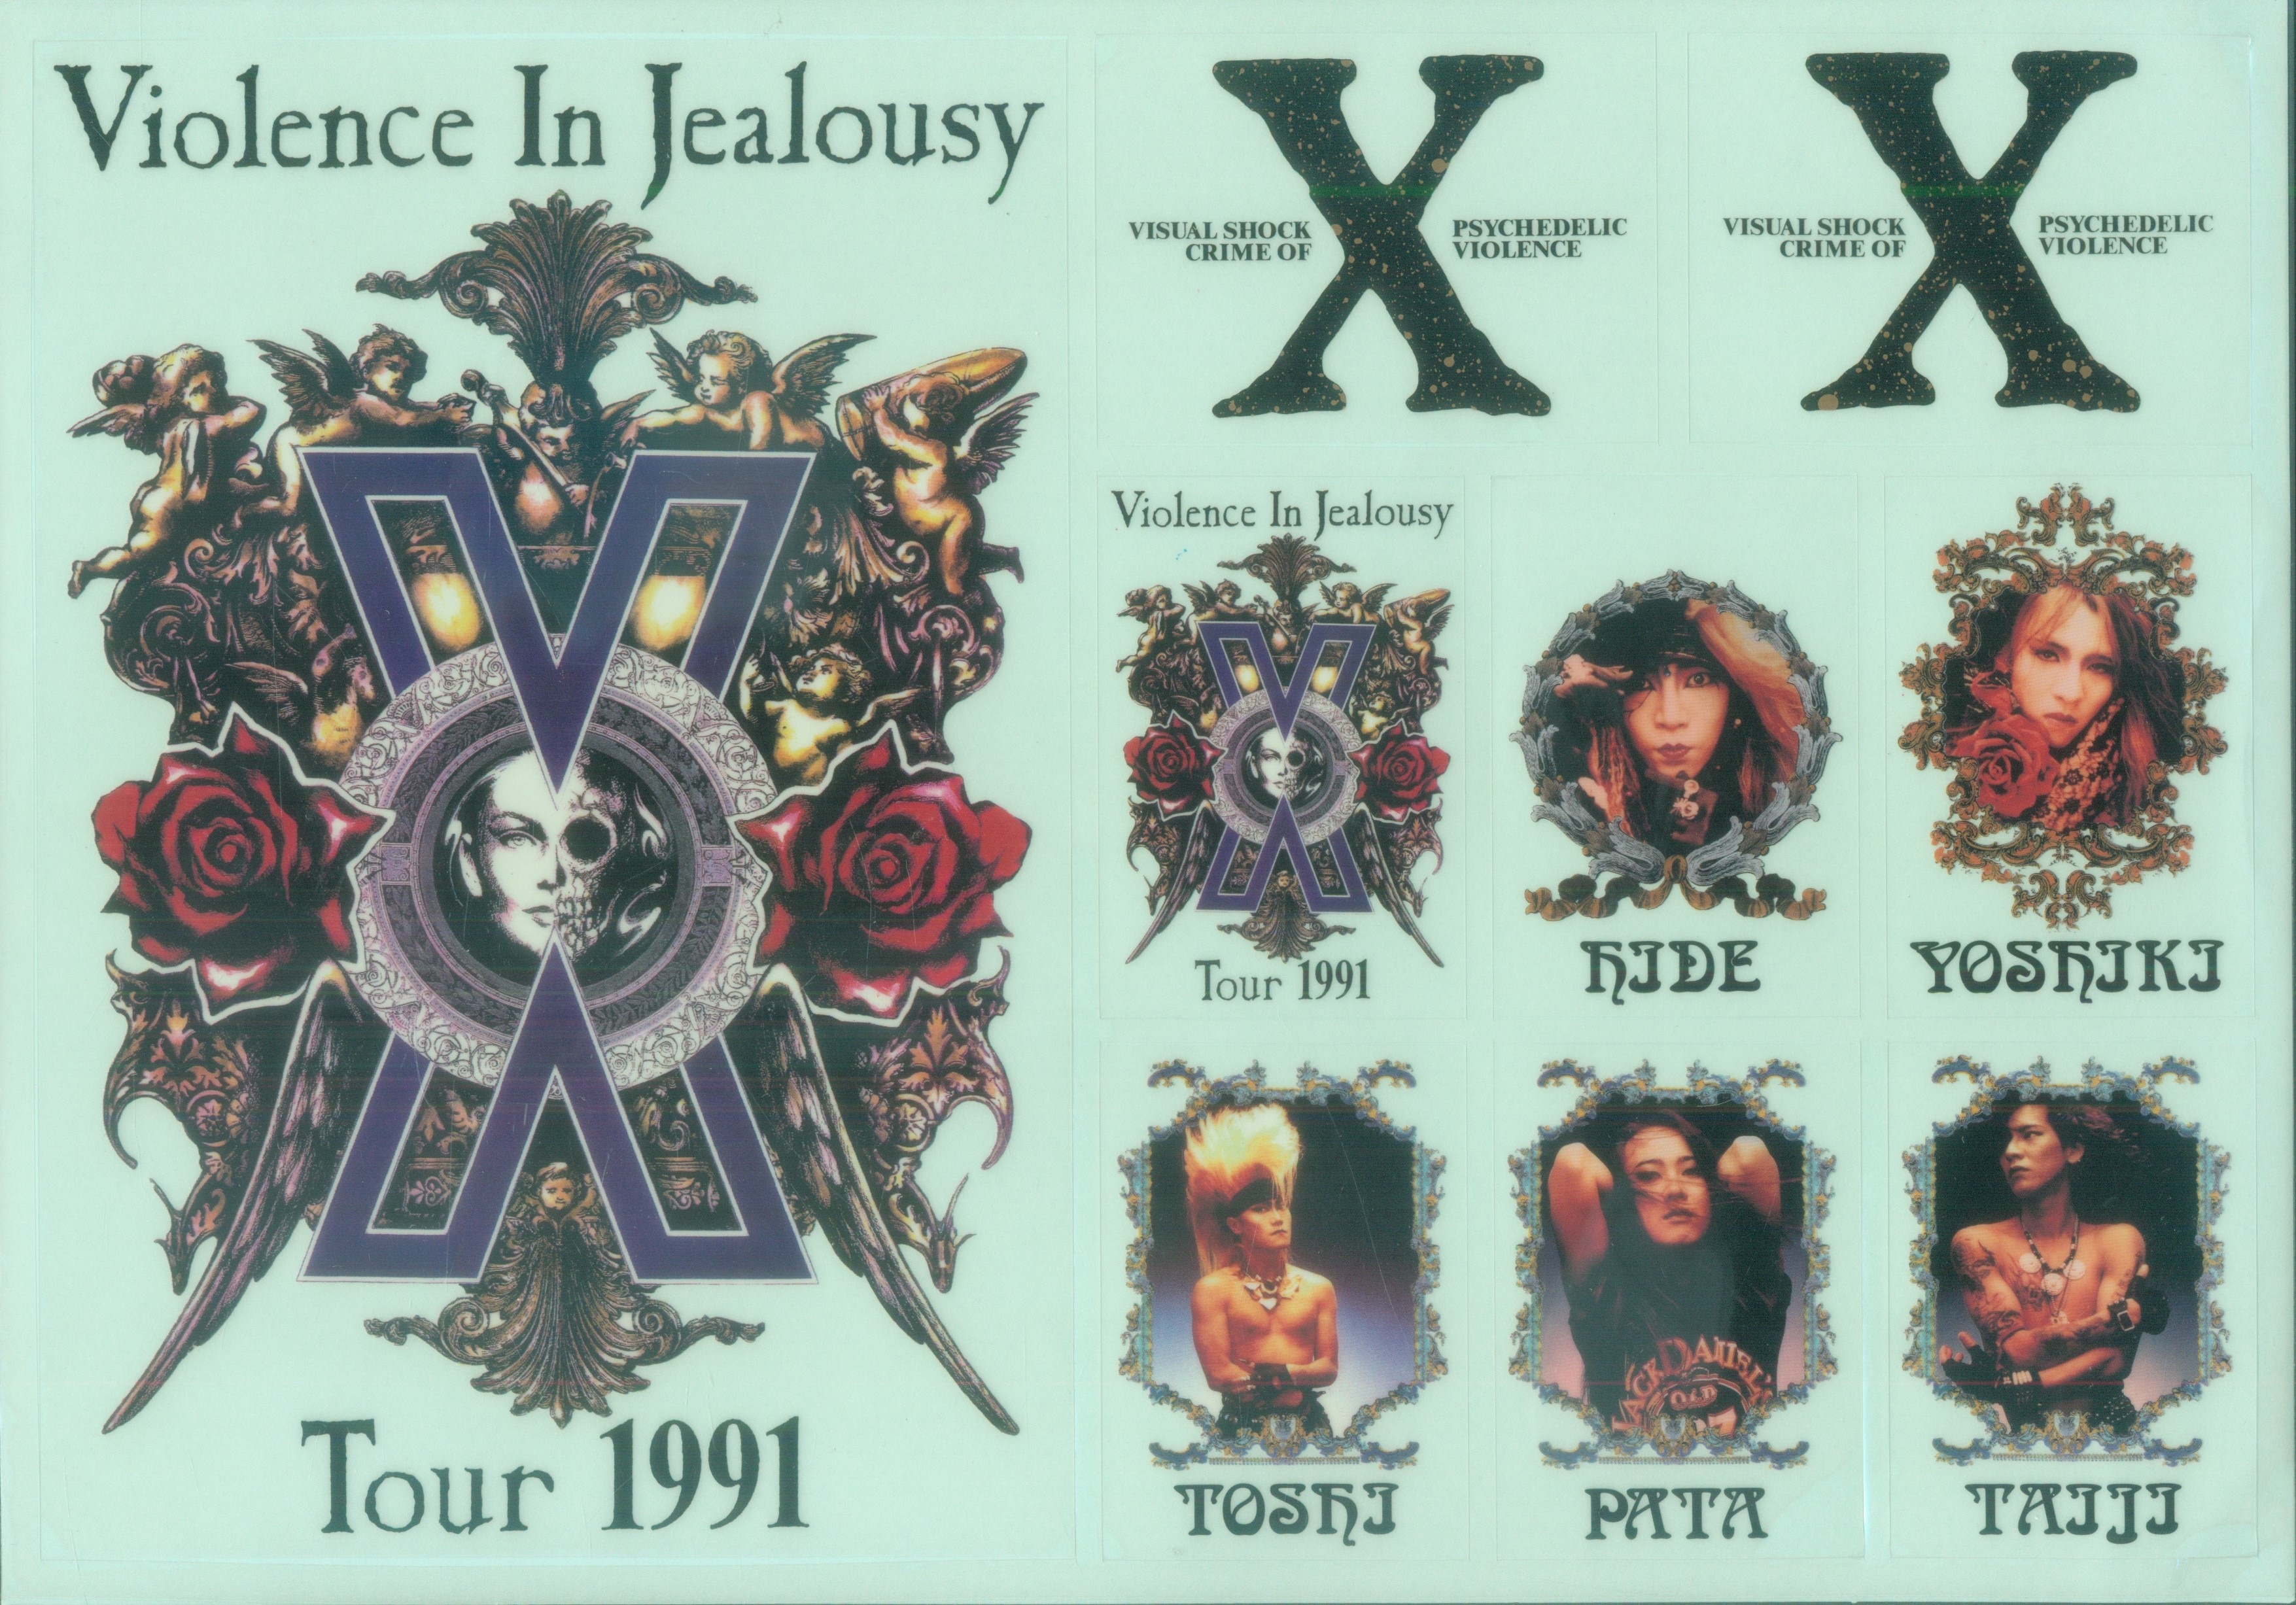 X(Xjapan) Violence in jealousy tour ポスター-